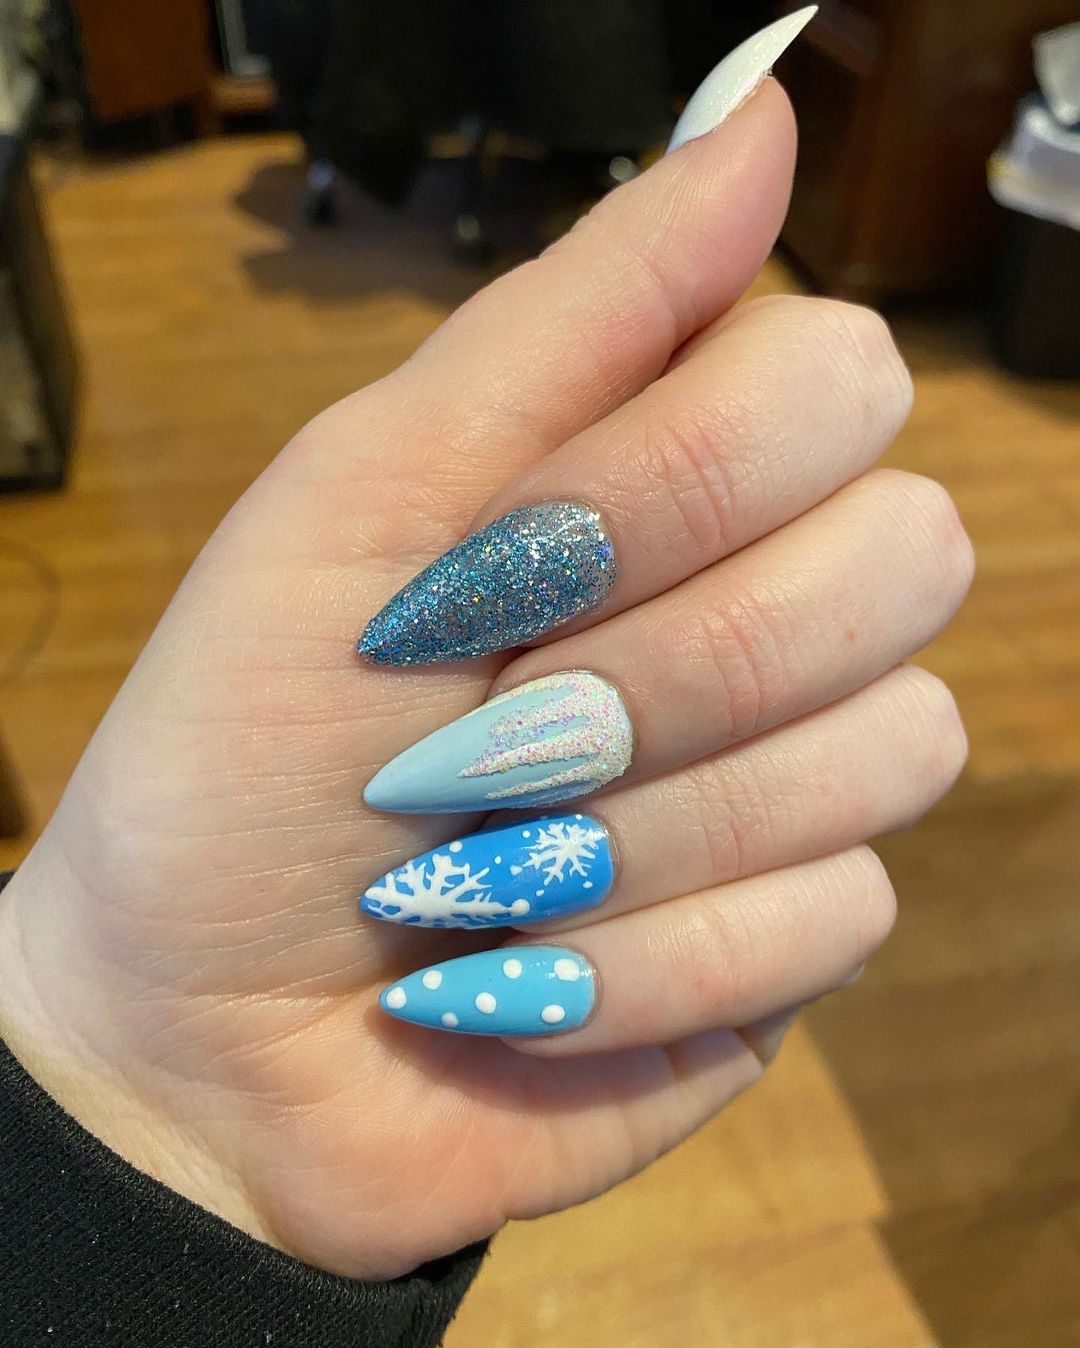 Nails with blue and frosty design.